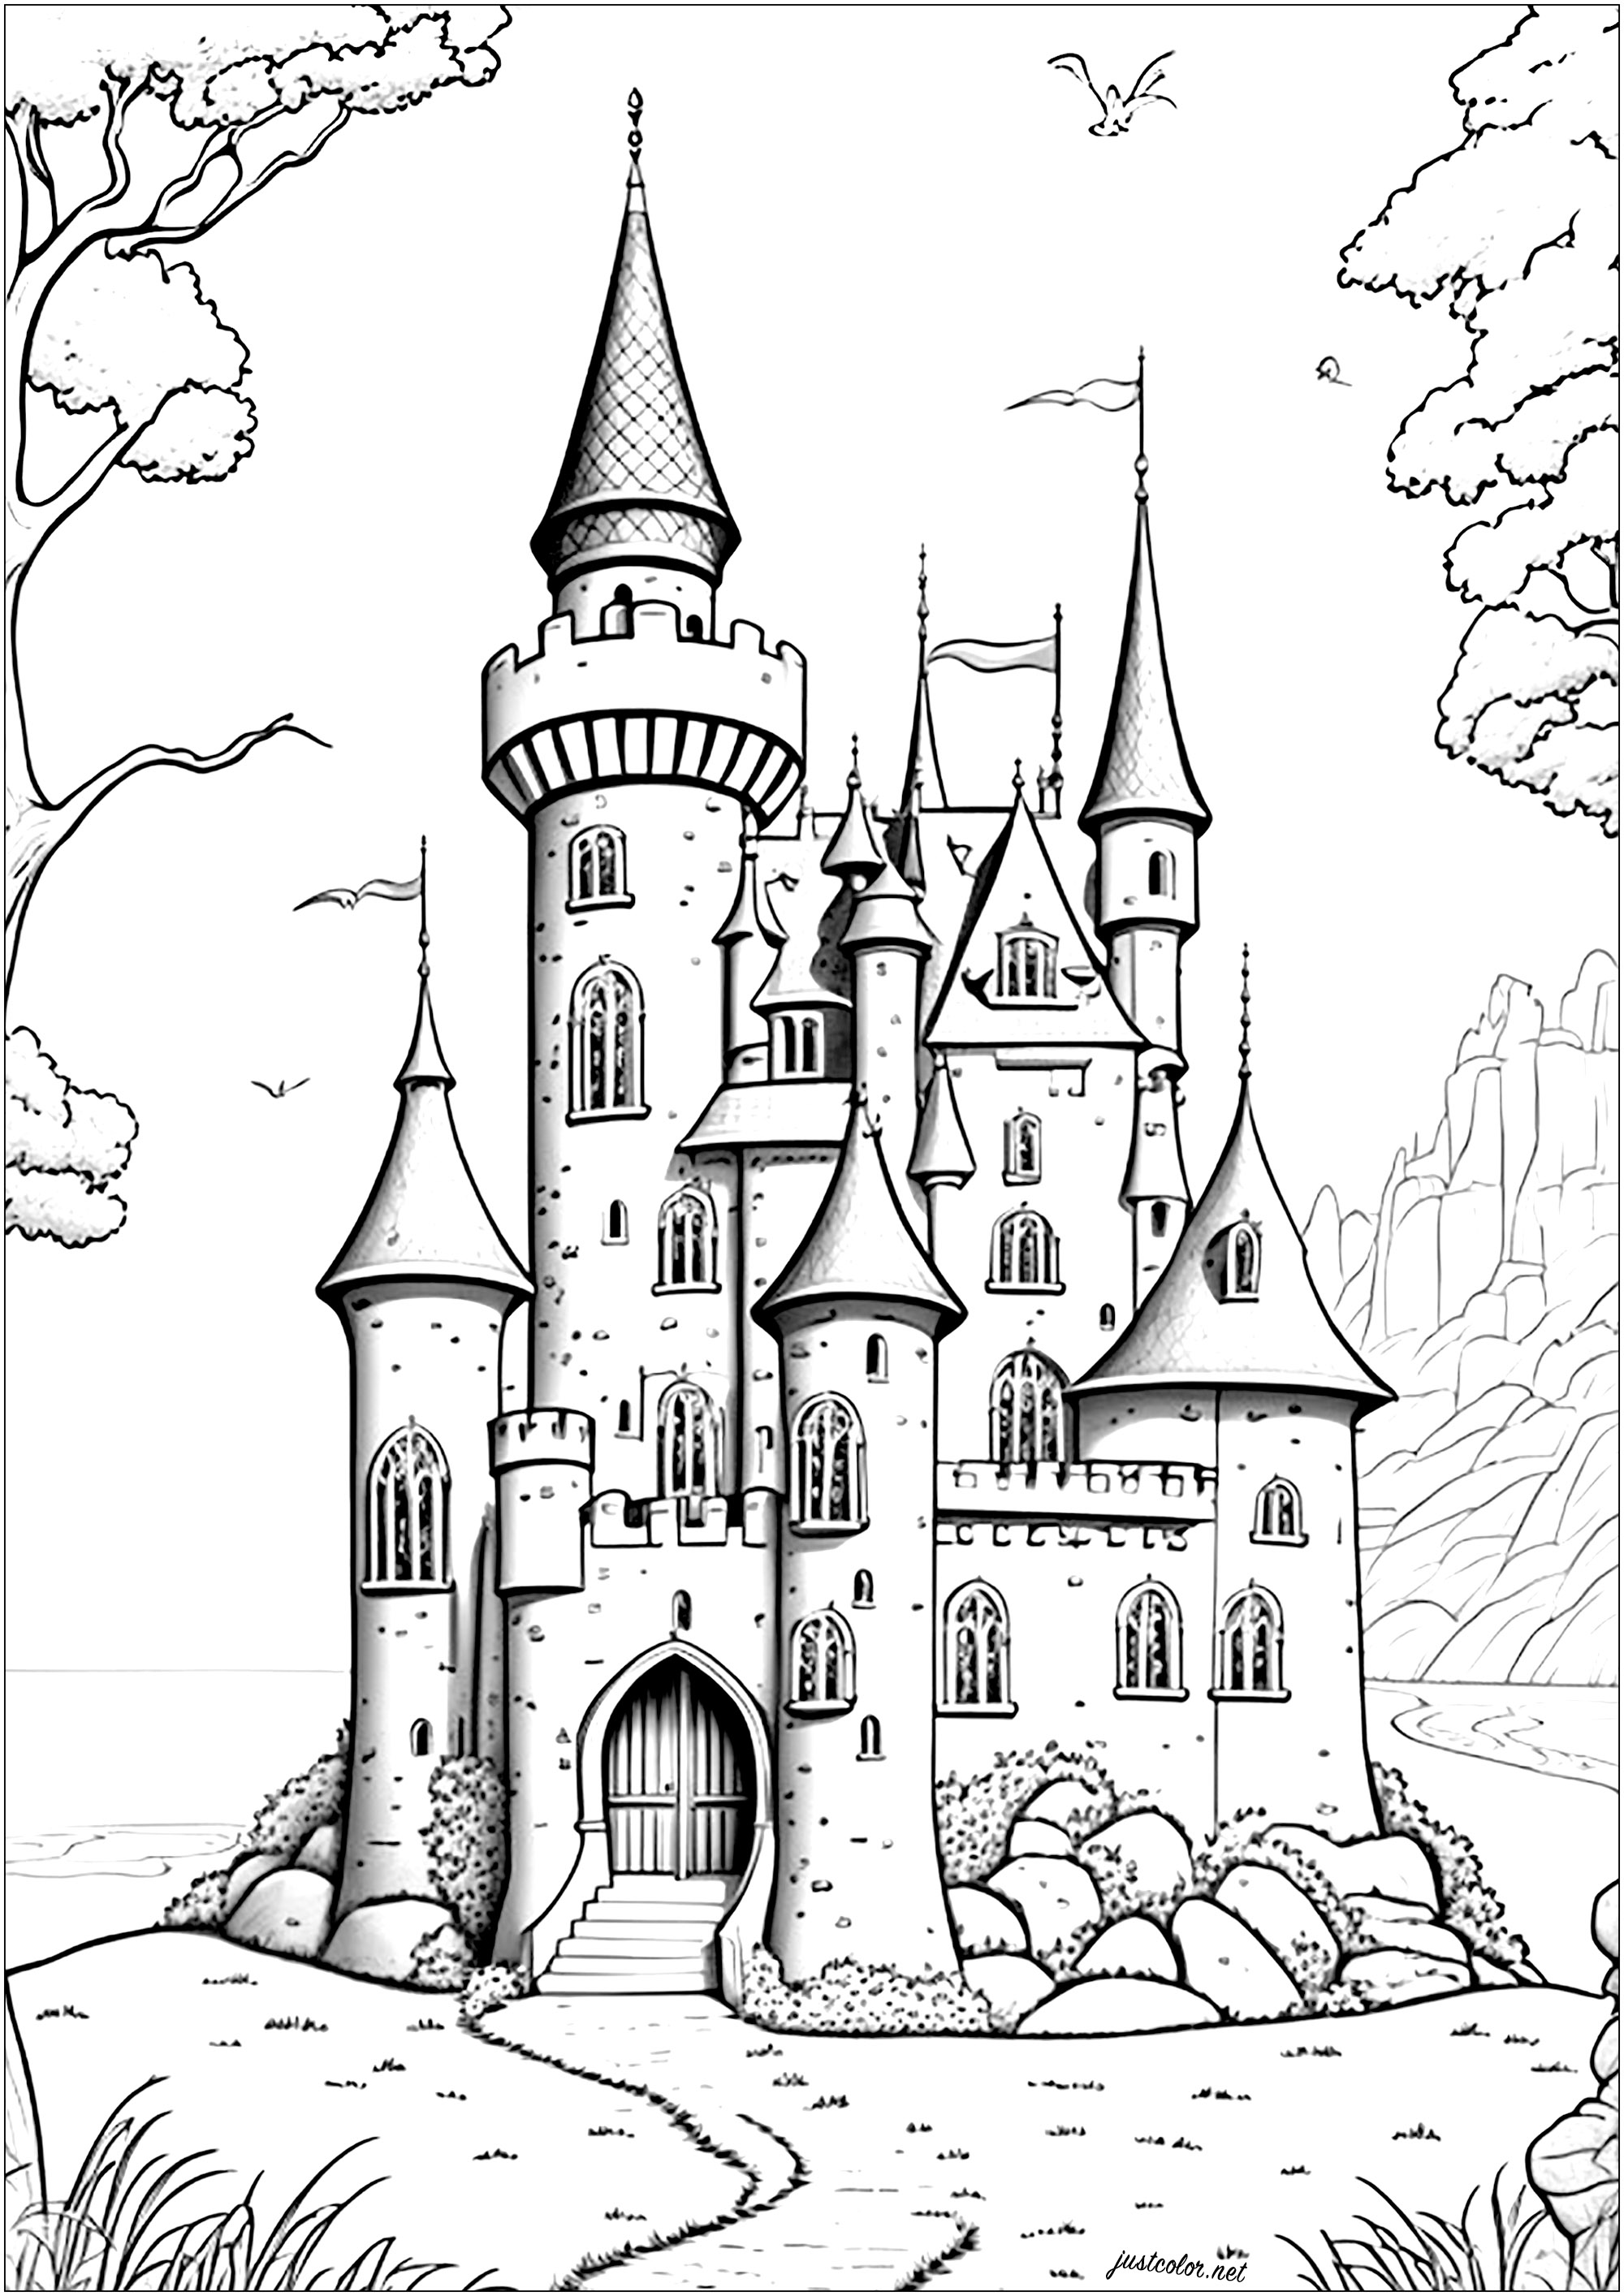 Majestic castle rising to the sky, with stone walls and pointed towers. The main gate is large and imposing, and each turret is topped by a flag fluttering in the wind.
